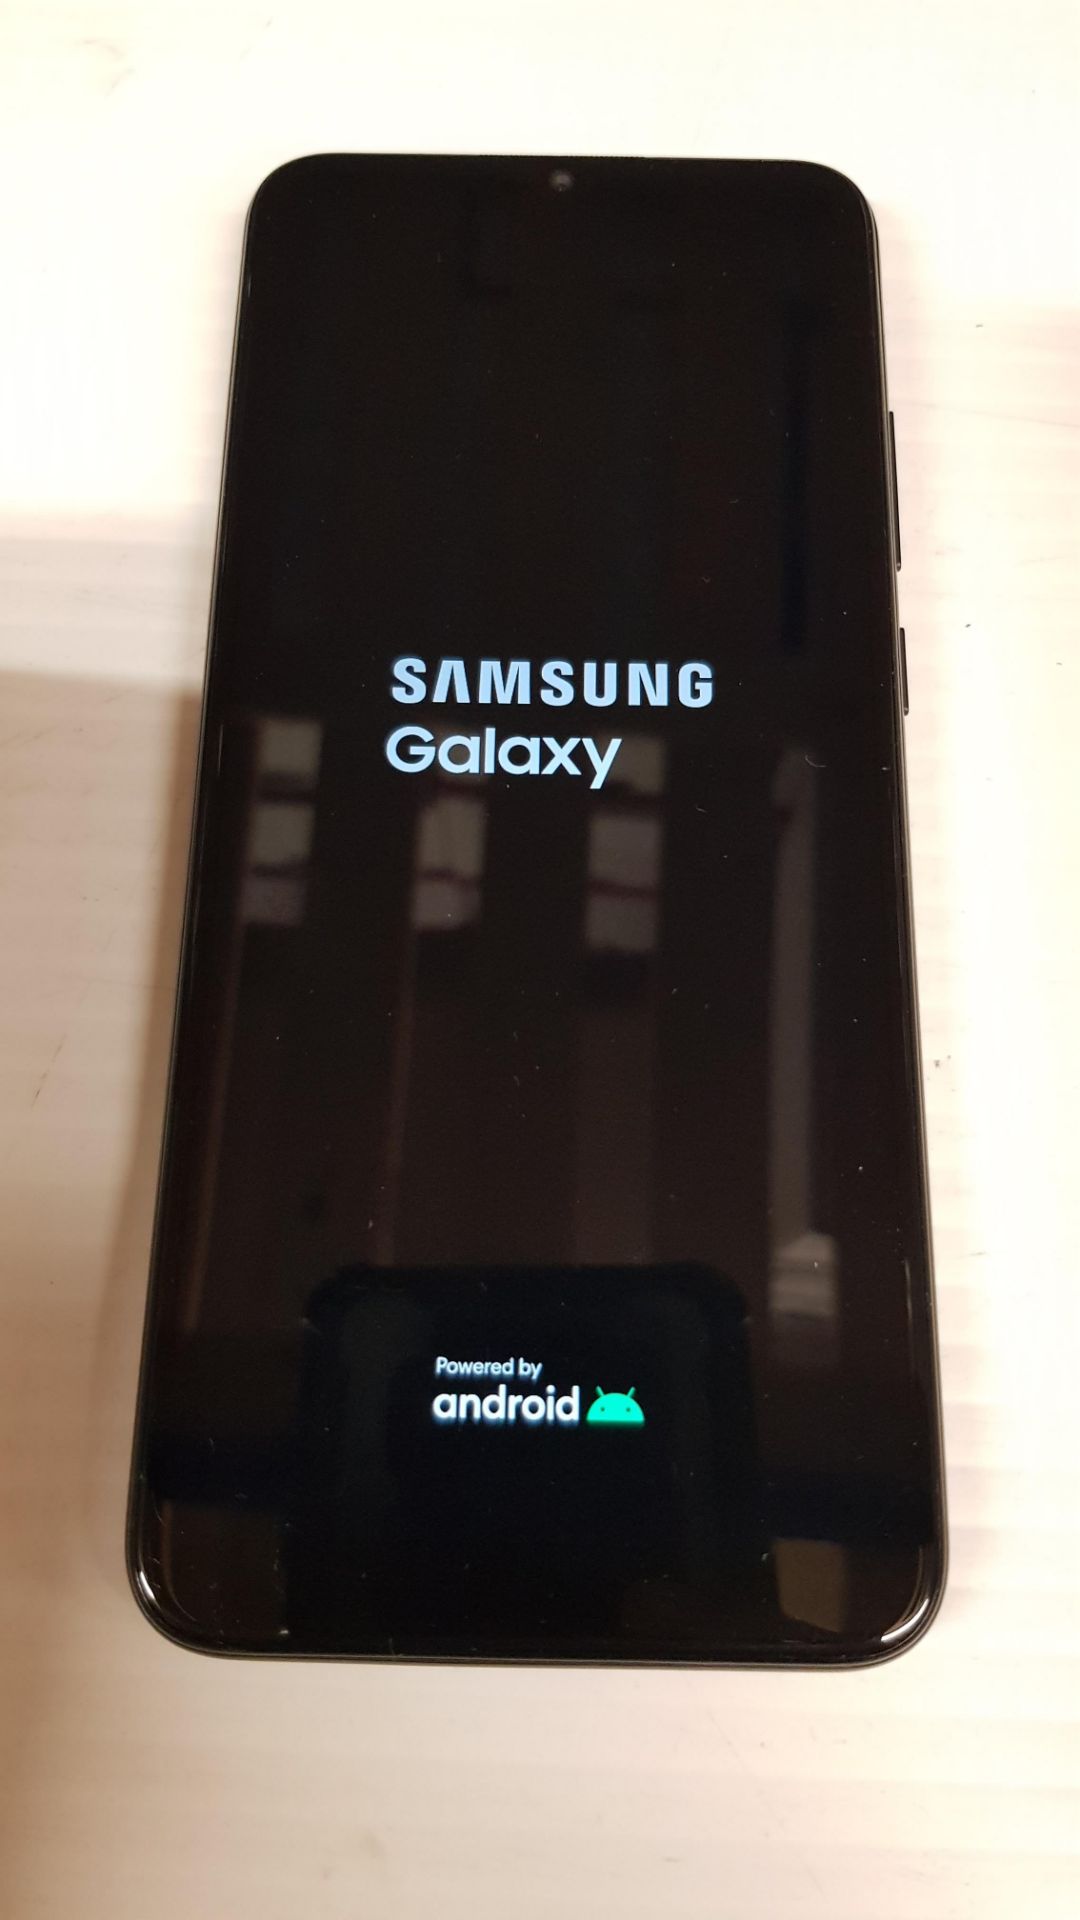 Galaxy A03 Smartphone Black 64GB. RRP £150. (Unit Appears A Grade, System Set Up Ready For Use). - Image 4 of 9